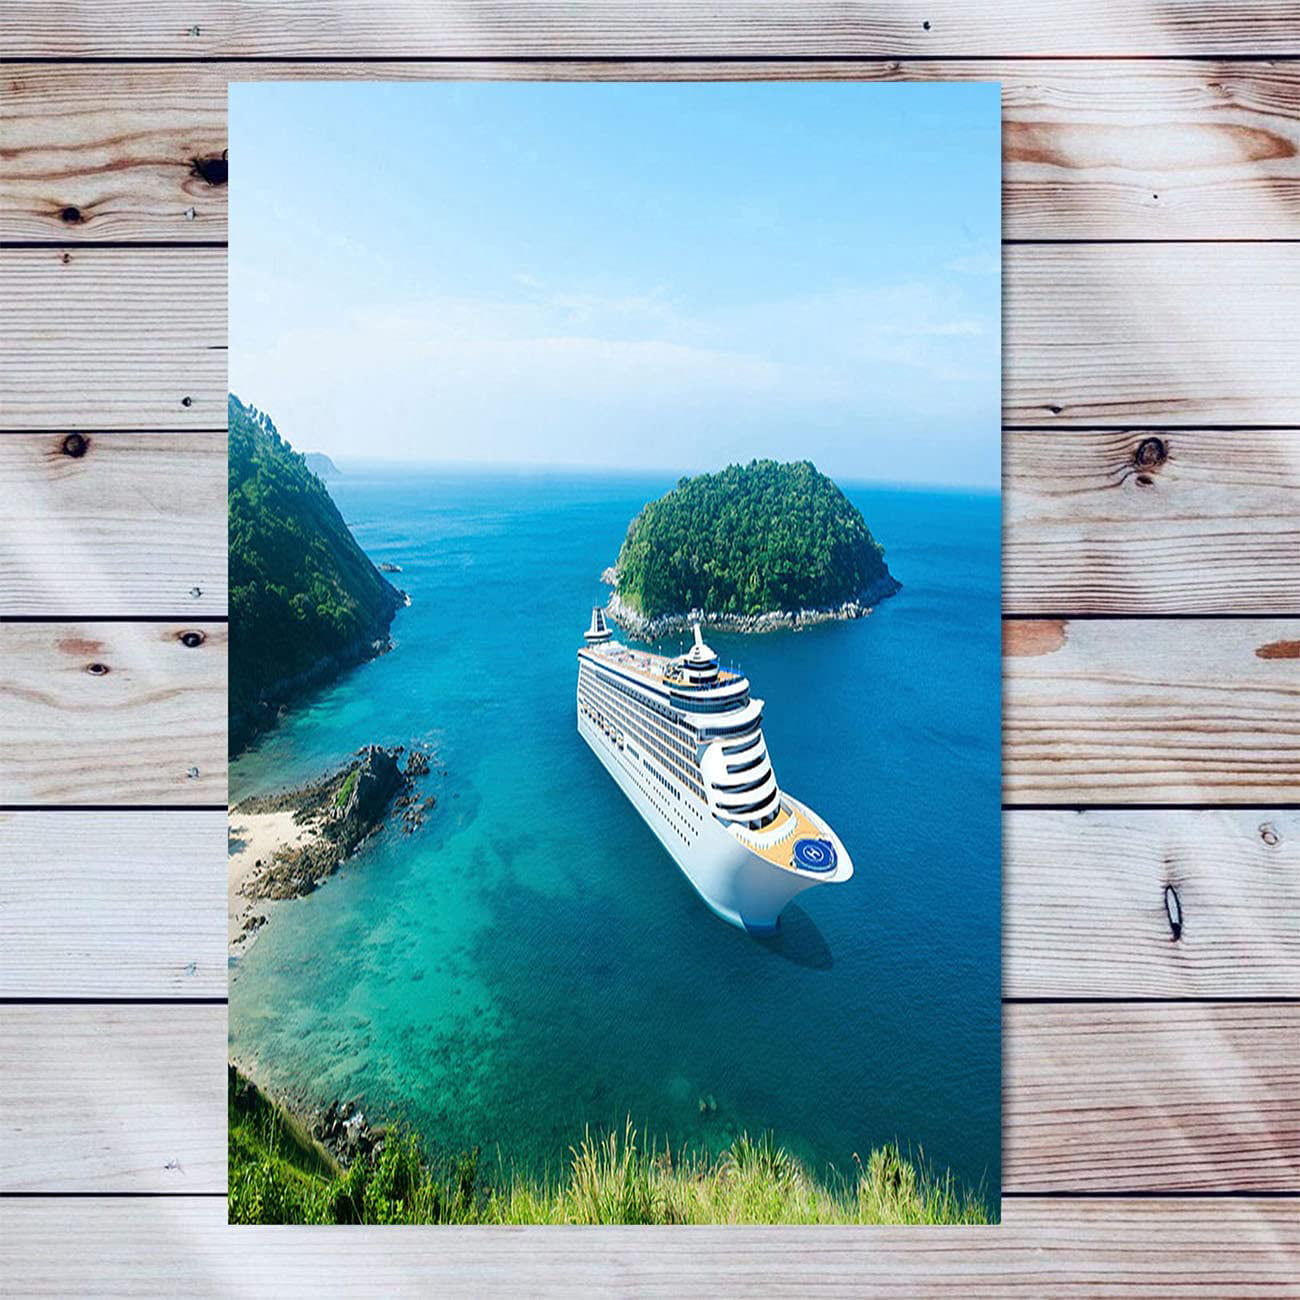 Ocean Blue Sky Canvas Wall Art Artwork Wooden Frame Painting 3D Cruise Ship  In Beautiful Ocean Blue Sky Landscape Nature Artwork For Bedroom Bathroom  Home Office Living Room Decorations 12x16 Inch